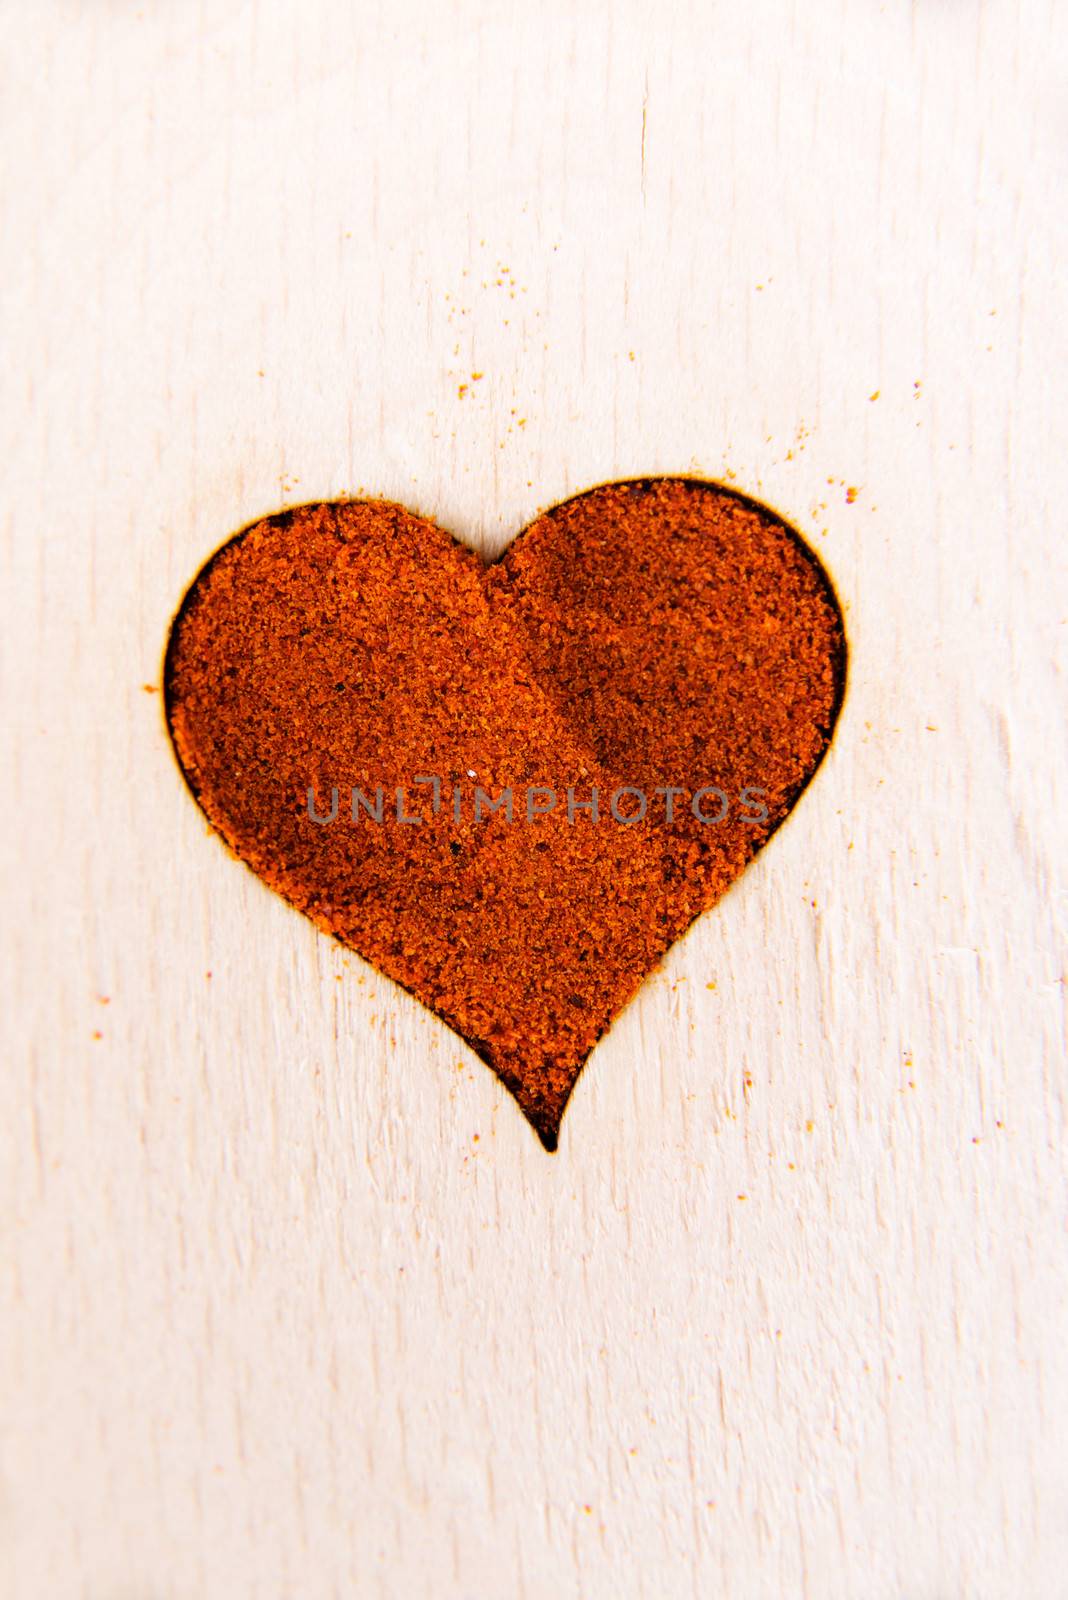 Heart shape made from spice on a wooden spoon. by BDS